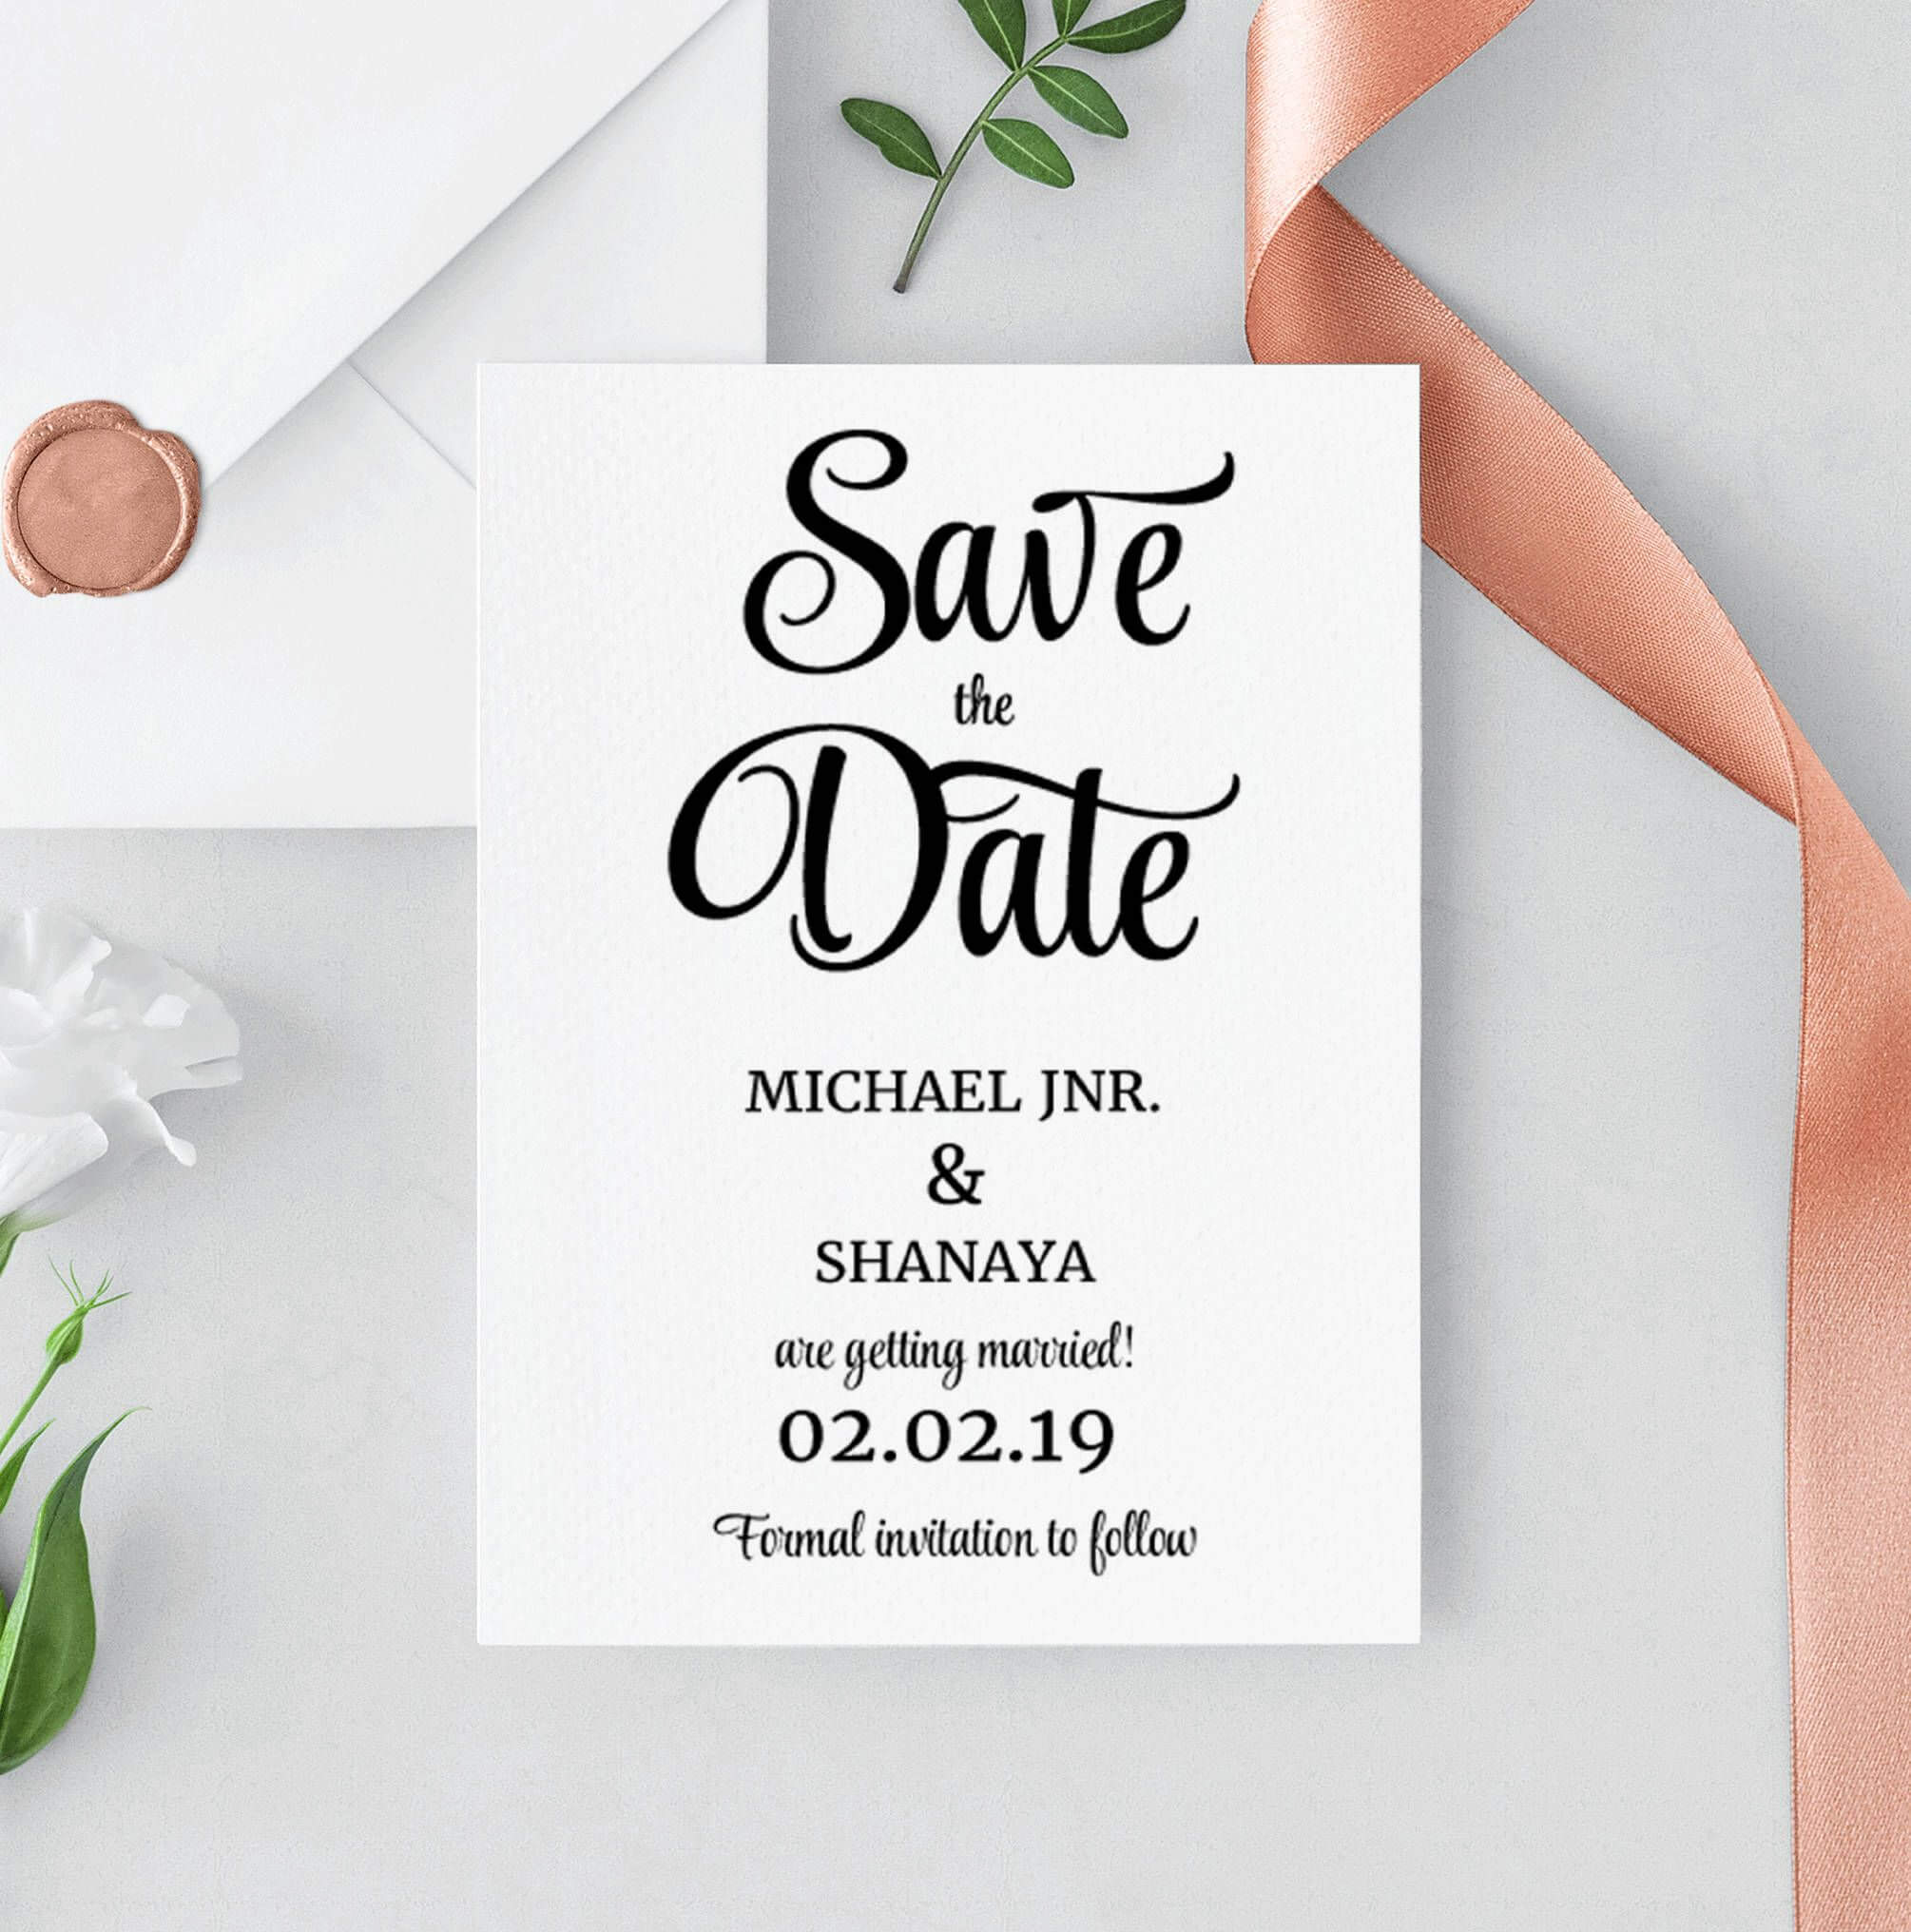 Save The Date Template, Save The Date Printable, Save The With Regard To Save The Date Cards Templates